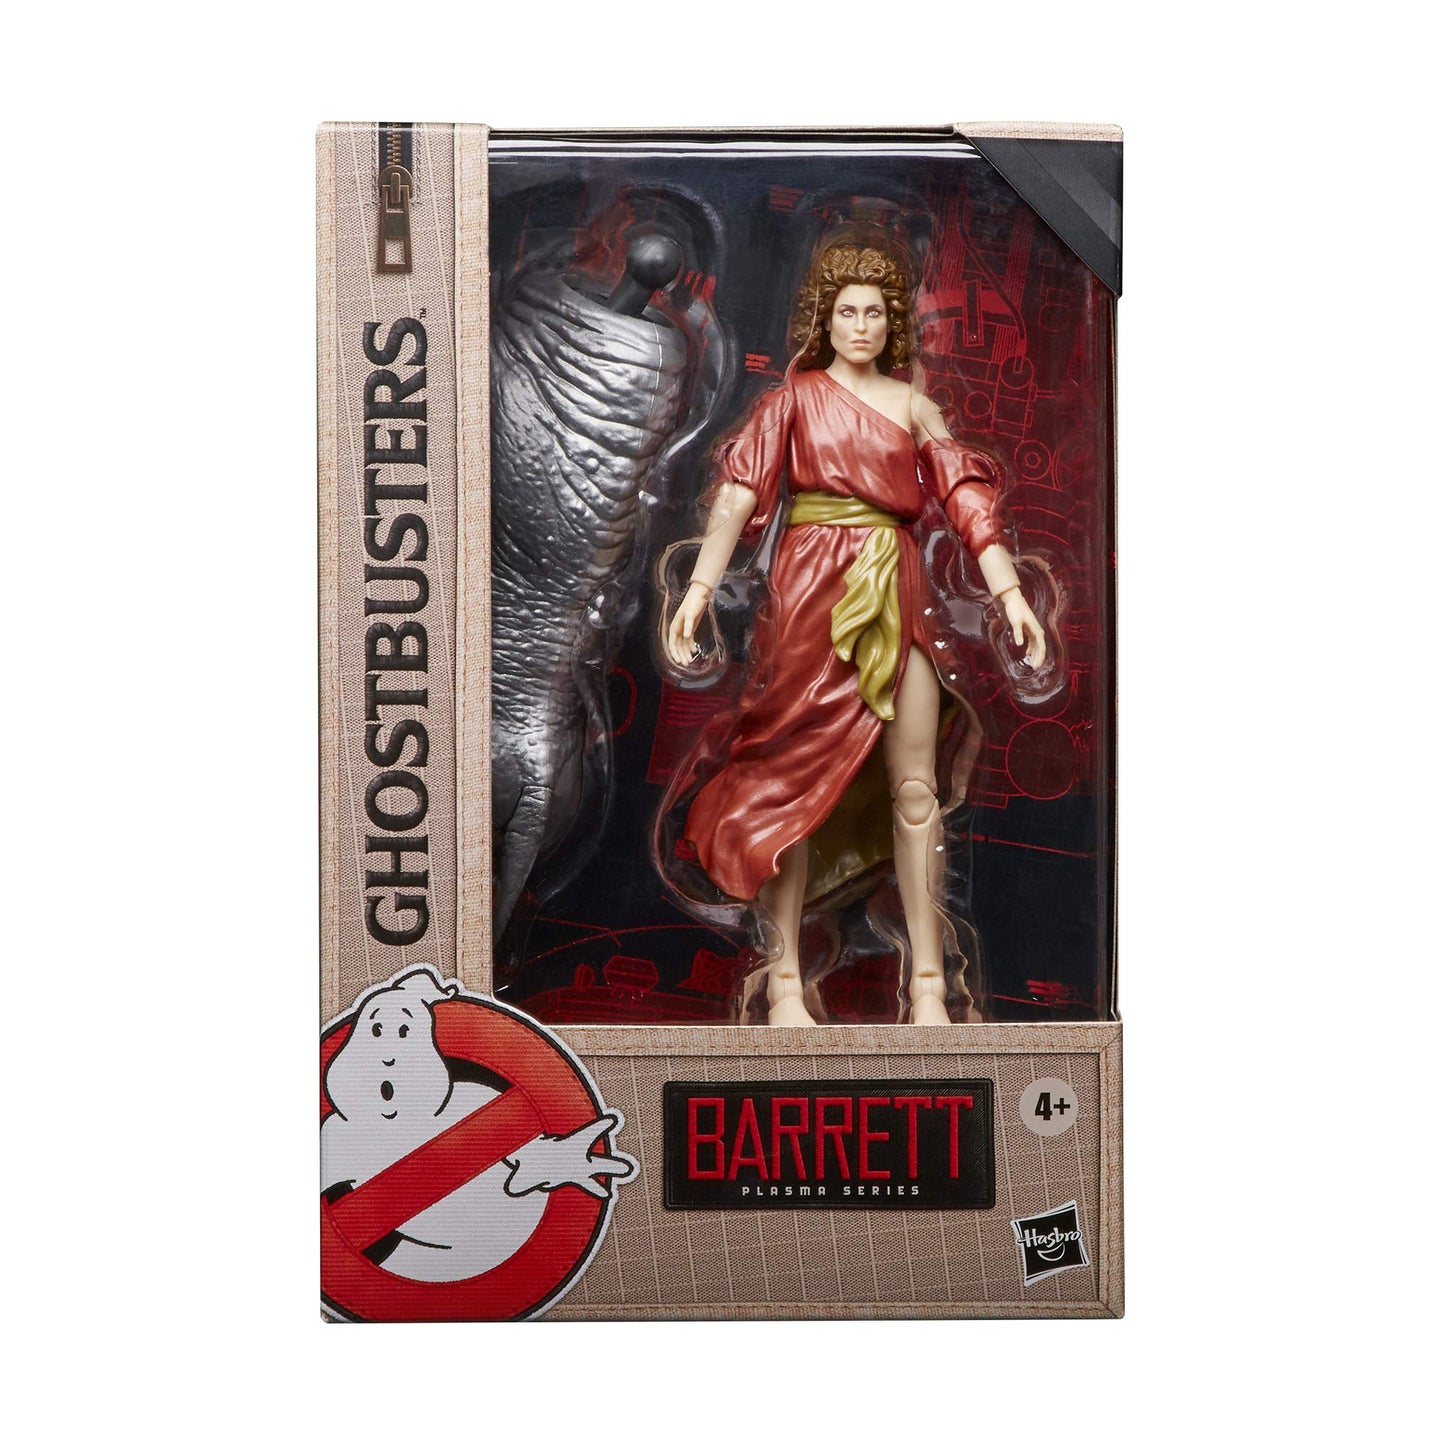 Ghostbusters Plasma Series Dana Barrett Toy 6-Inch-Scale Collectible Classic 1984 Ghostbusters Action Figure, Toys for Kids Ages 4 and Up